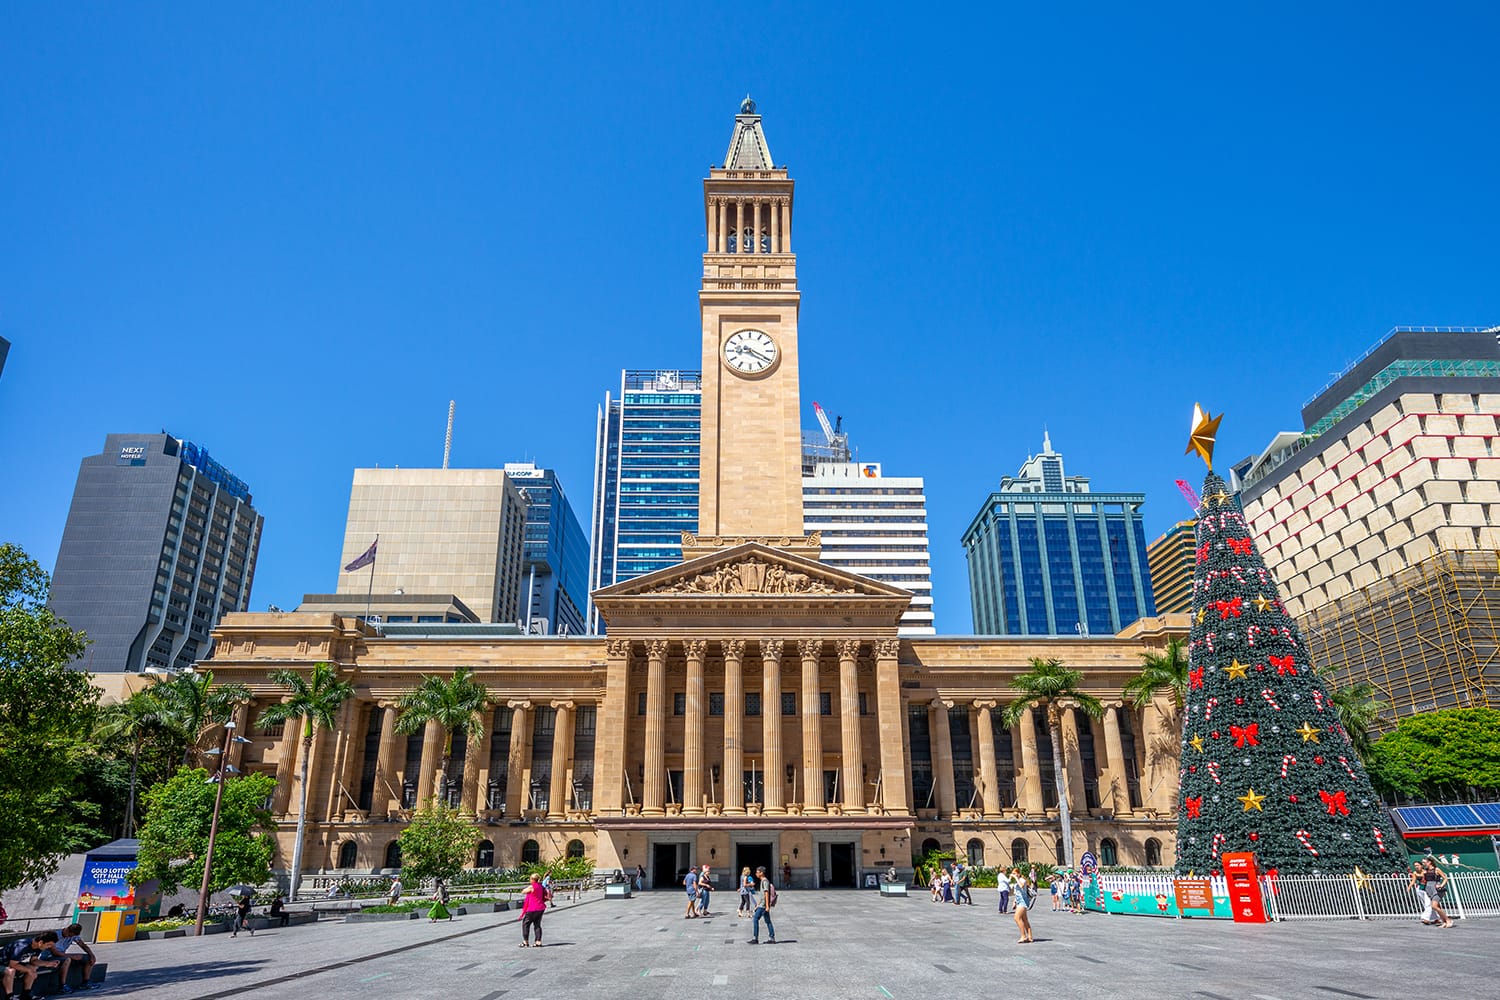 Brisbane City Hall, the seat of the Brisbane City Council, located at King George Square